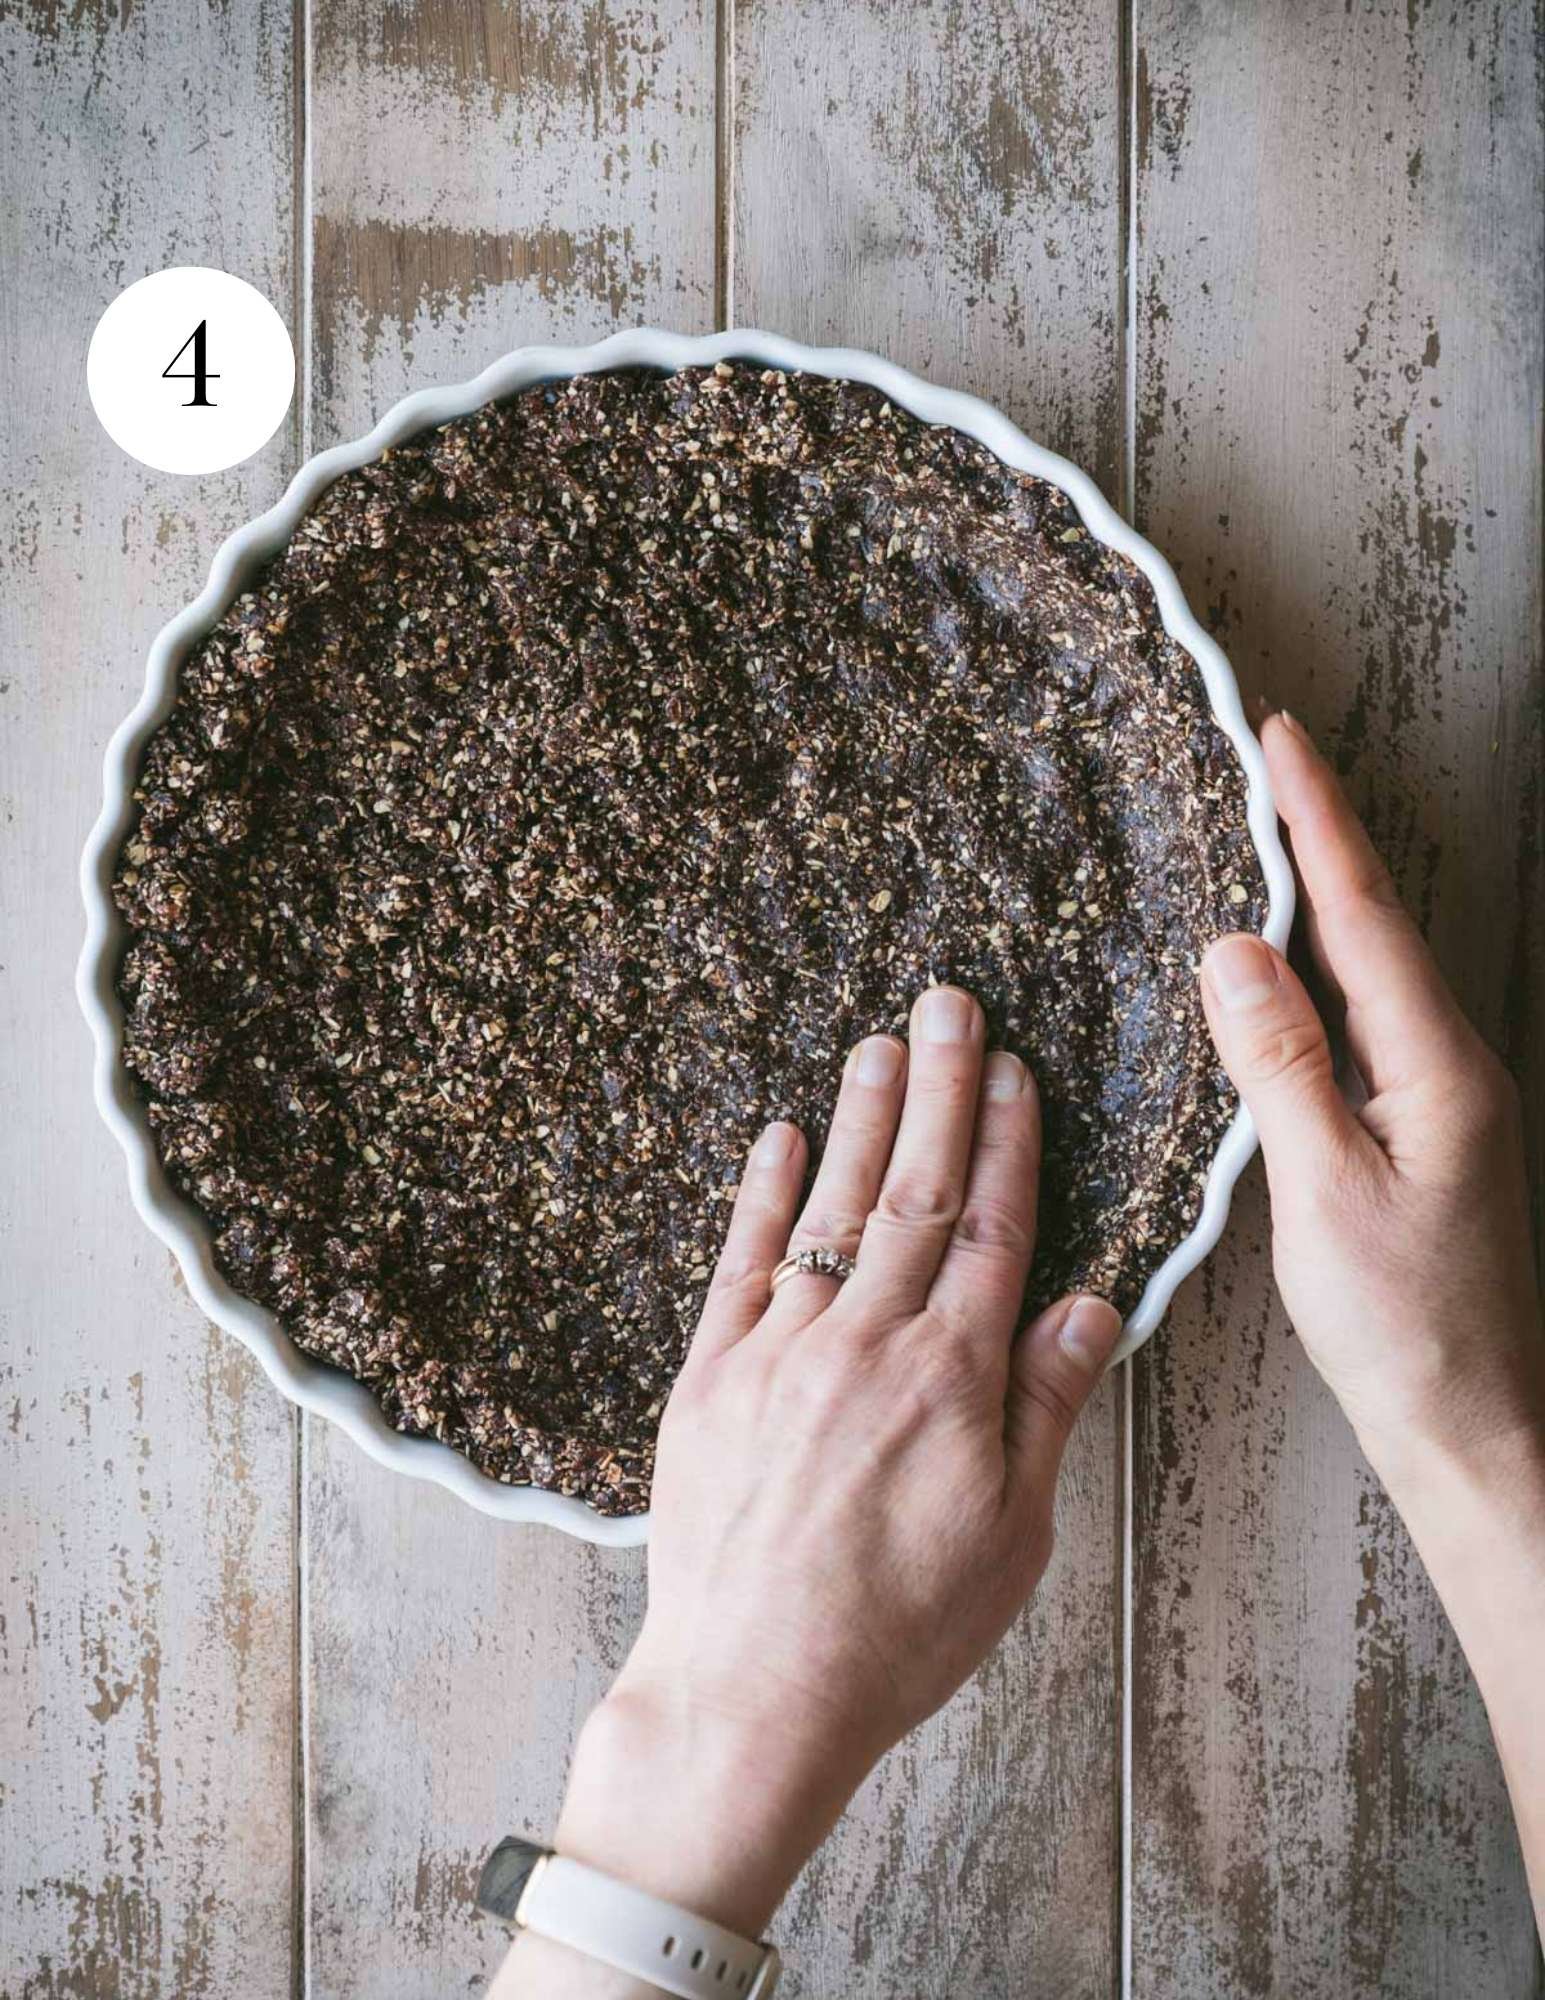 Pressing the crust into a tart pan by hand.